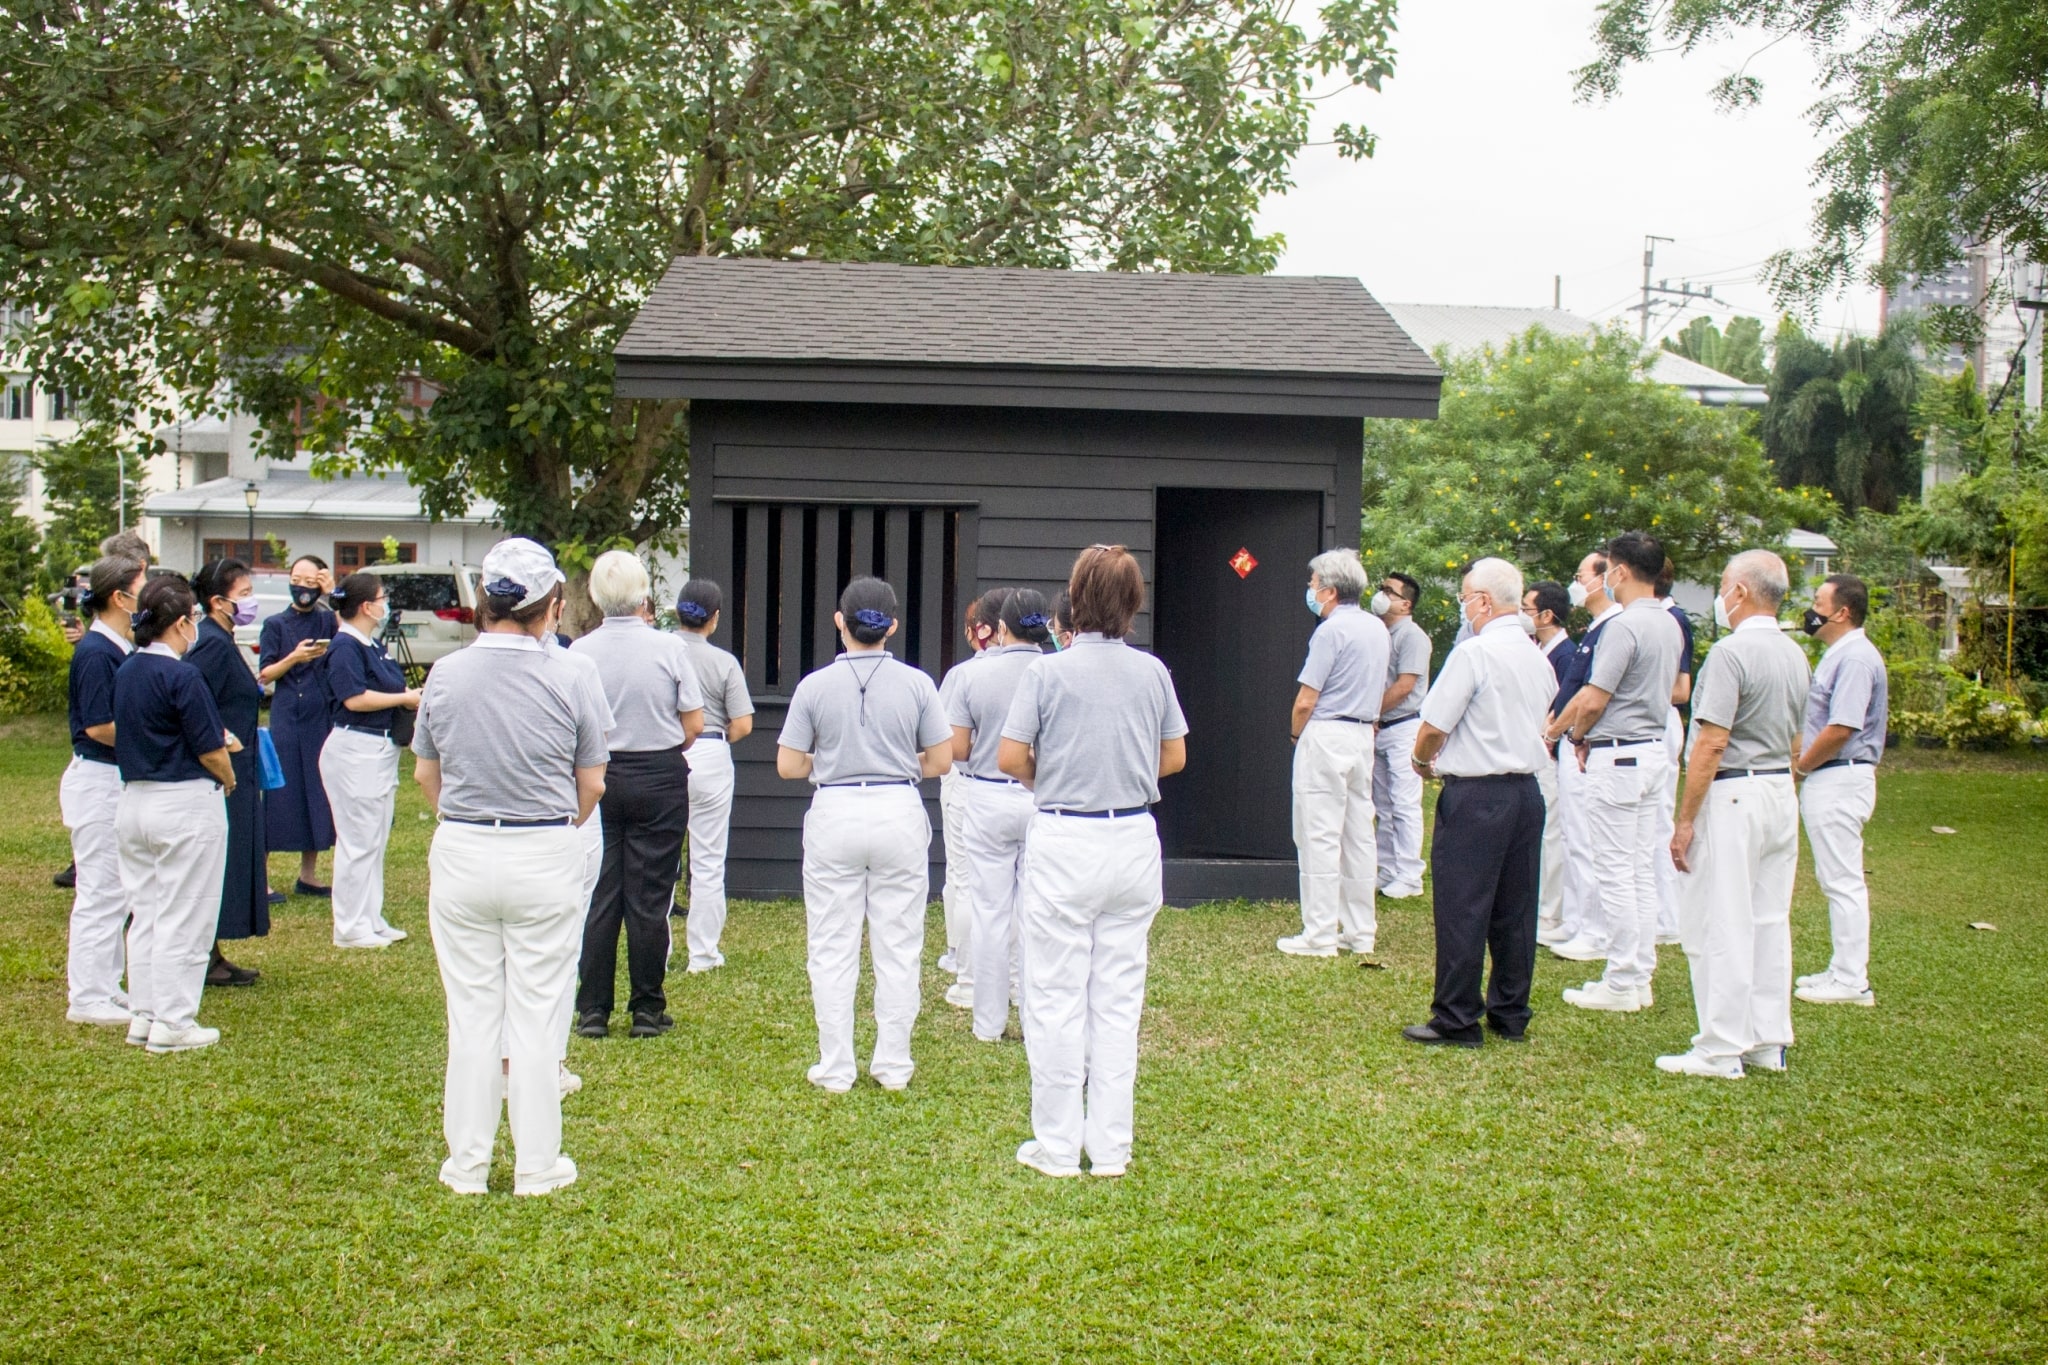 Volunteers in training listen to a speaker explain the significance of the wooden cabin. It’s a replica of the one Dharma Master Cheng Yen lived in during her early years as Tzu Chi founder. 【Photo by Matt Serrano】